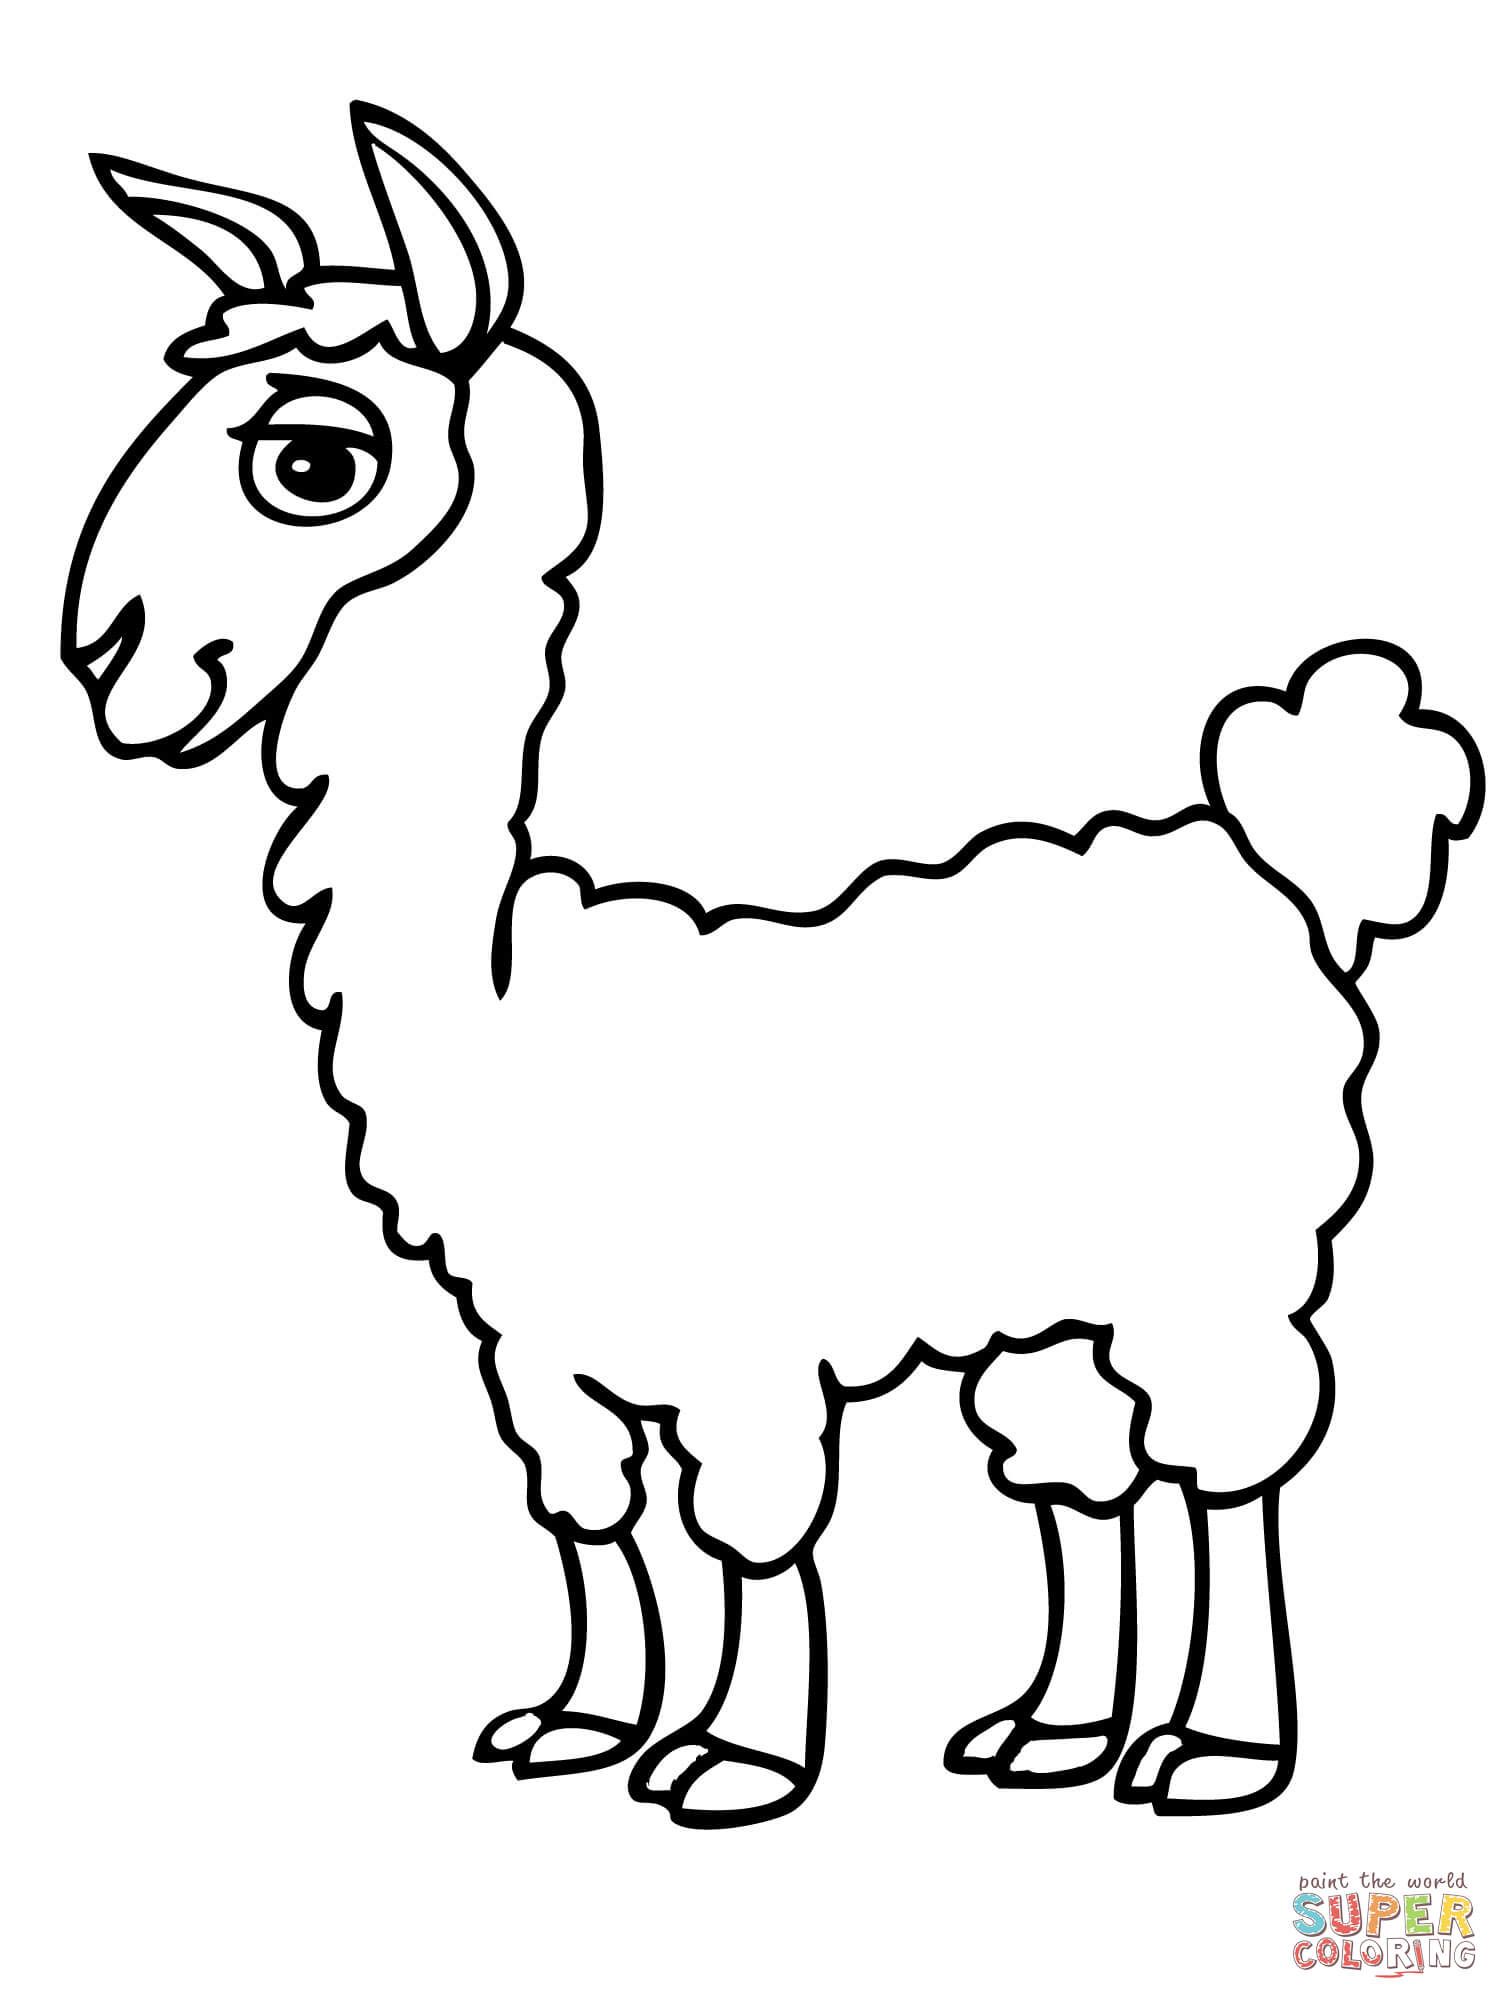 Cute alpaca coloring page free printable coloring pages unicorn coloring pages cute coloring pages animal coloring pages